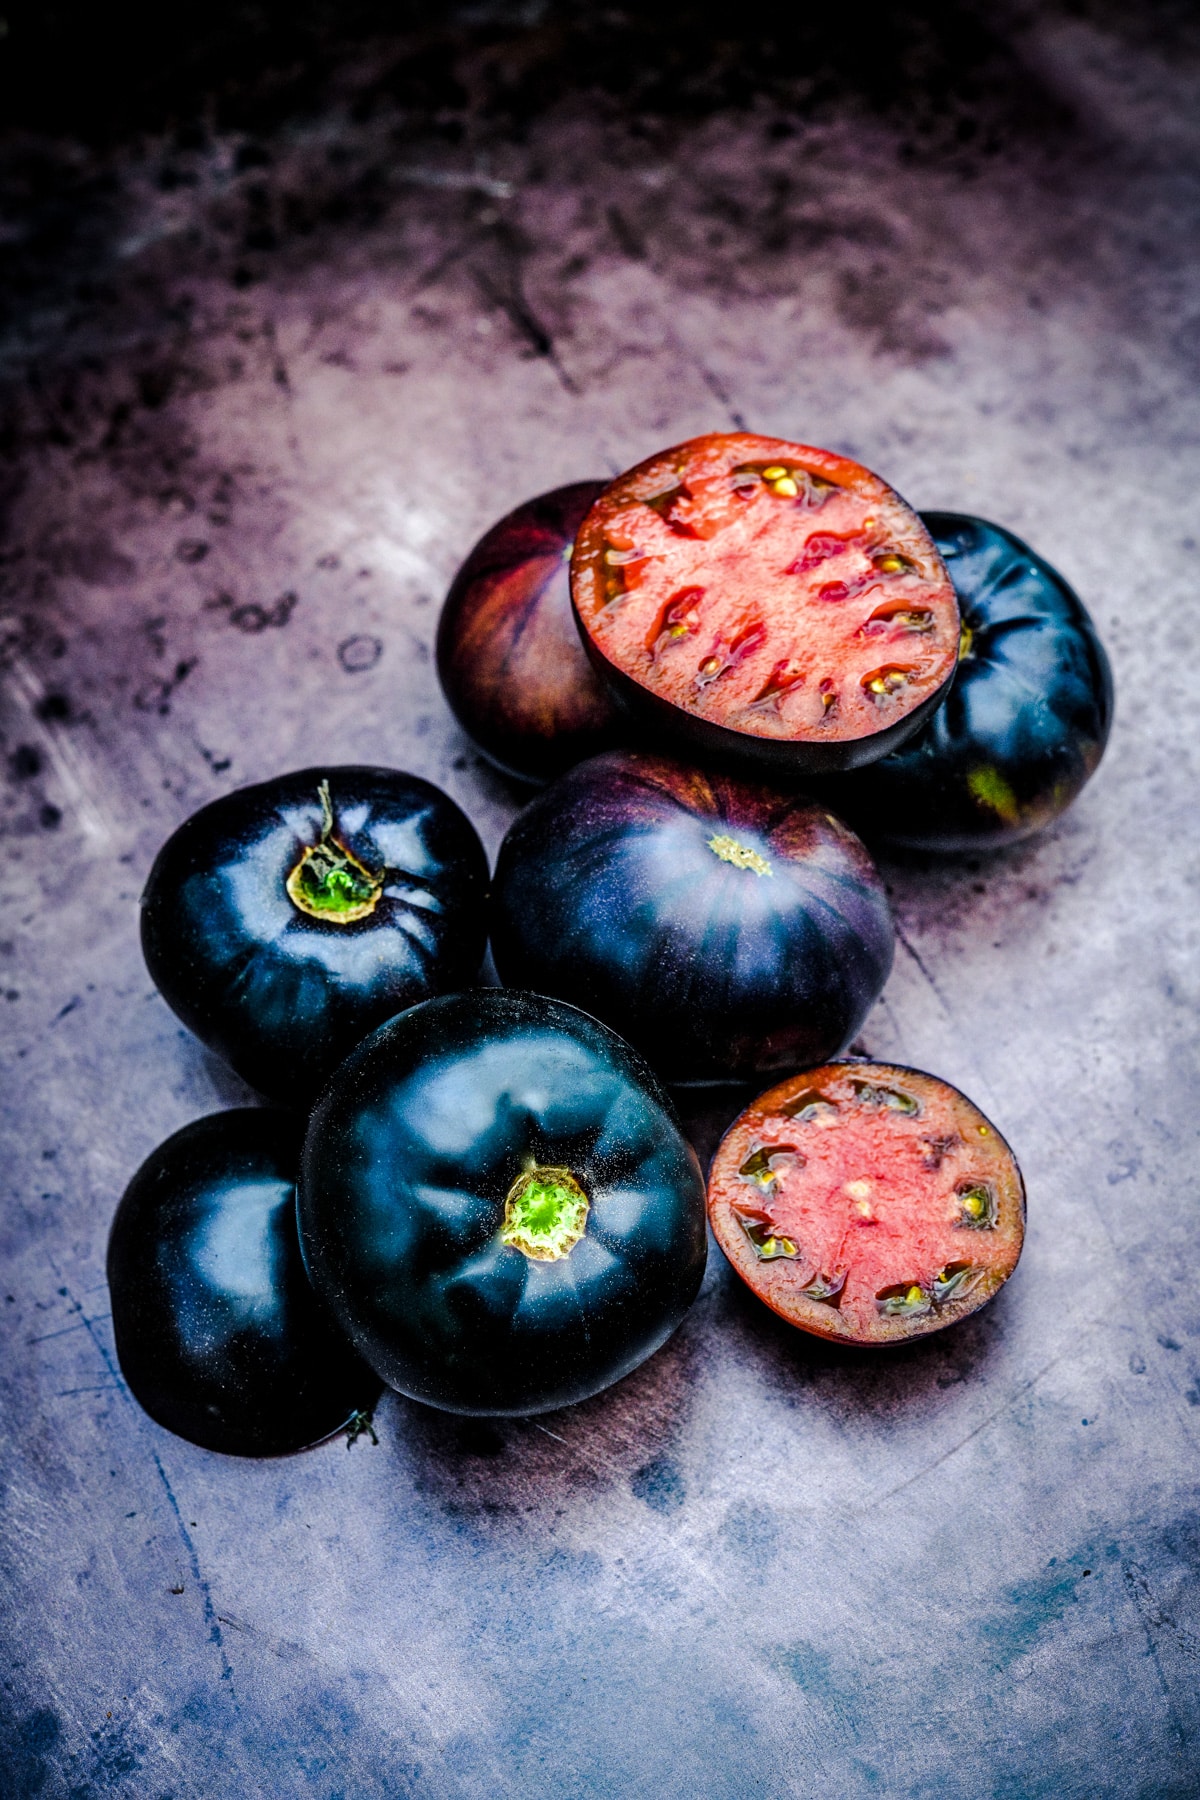 Black beauty tomato with black skin and red flesh.